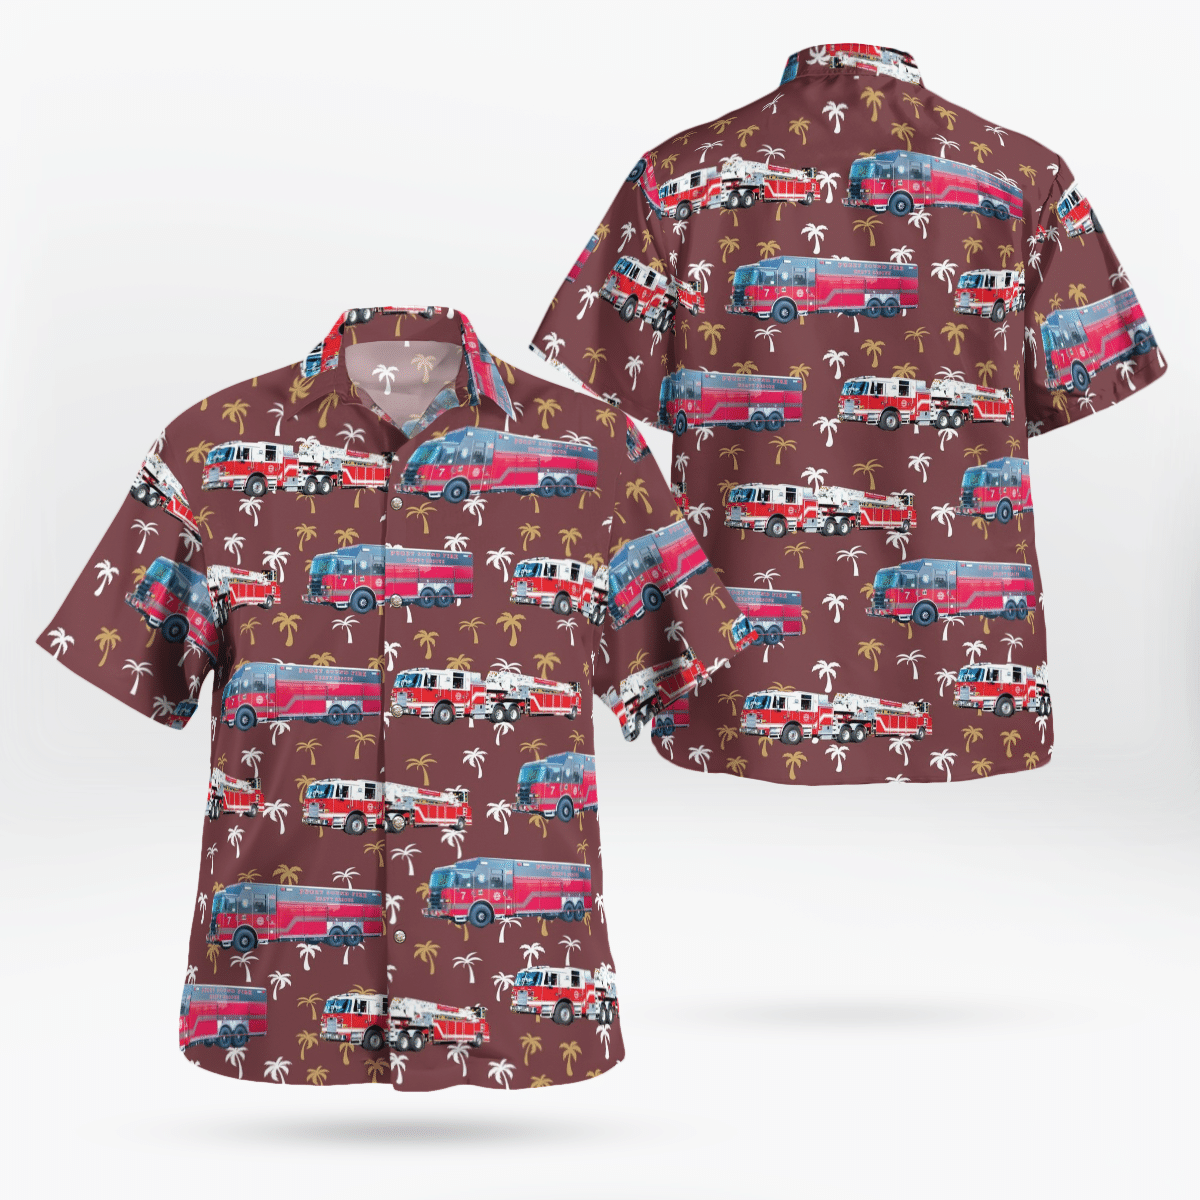 Consider getting these Hawaiian Shirt for your friends 79